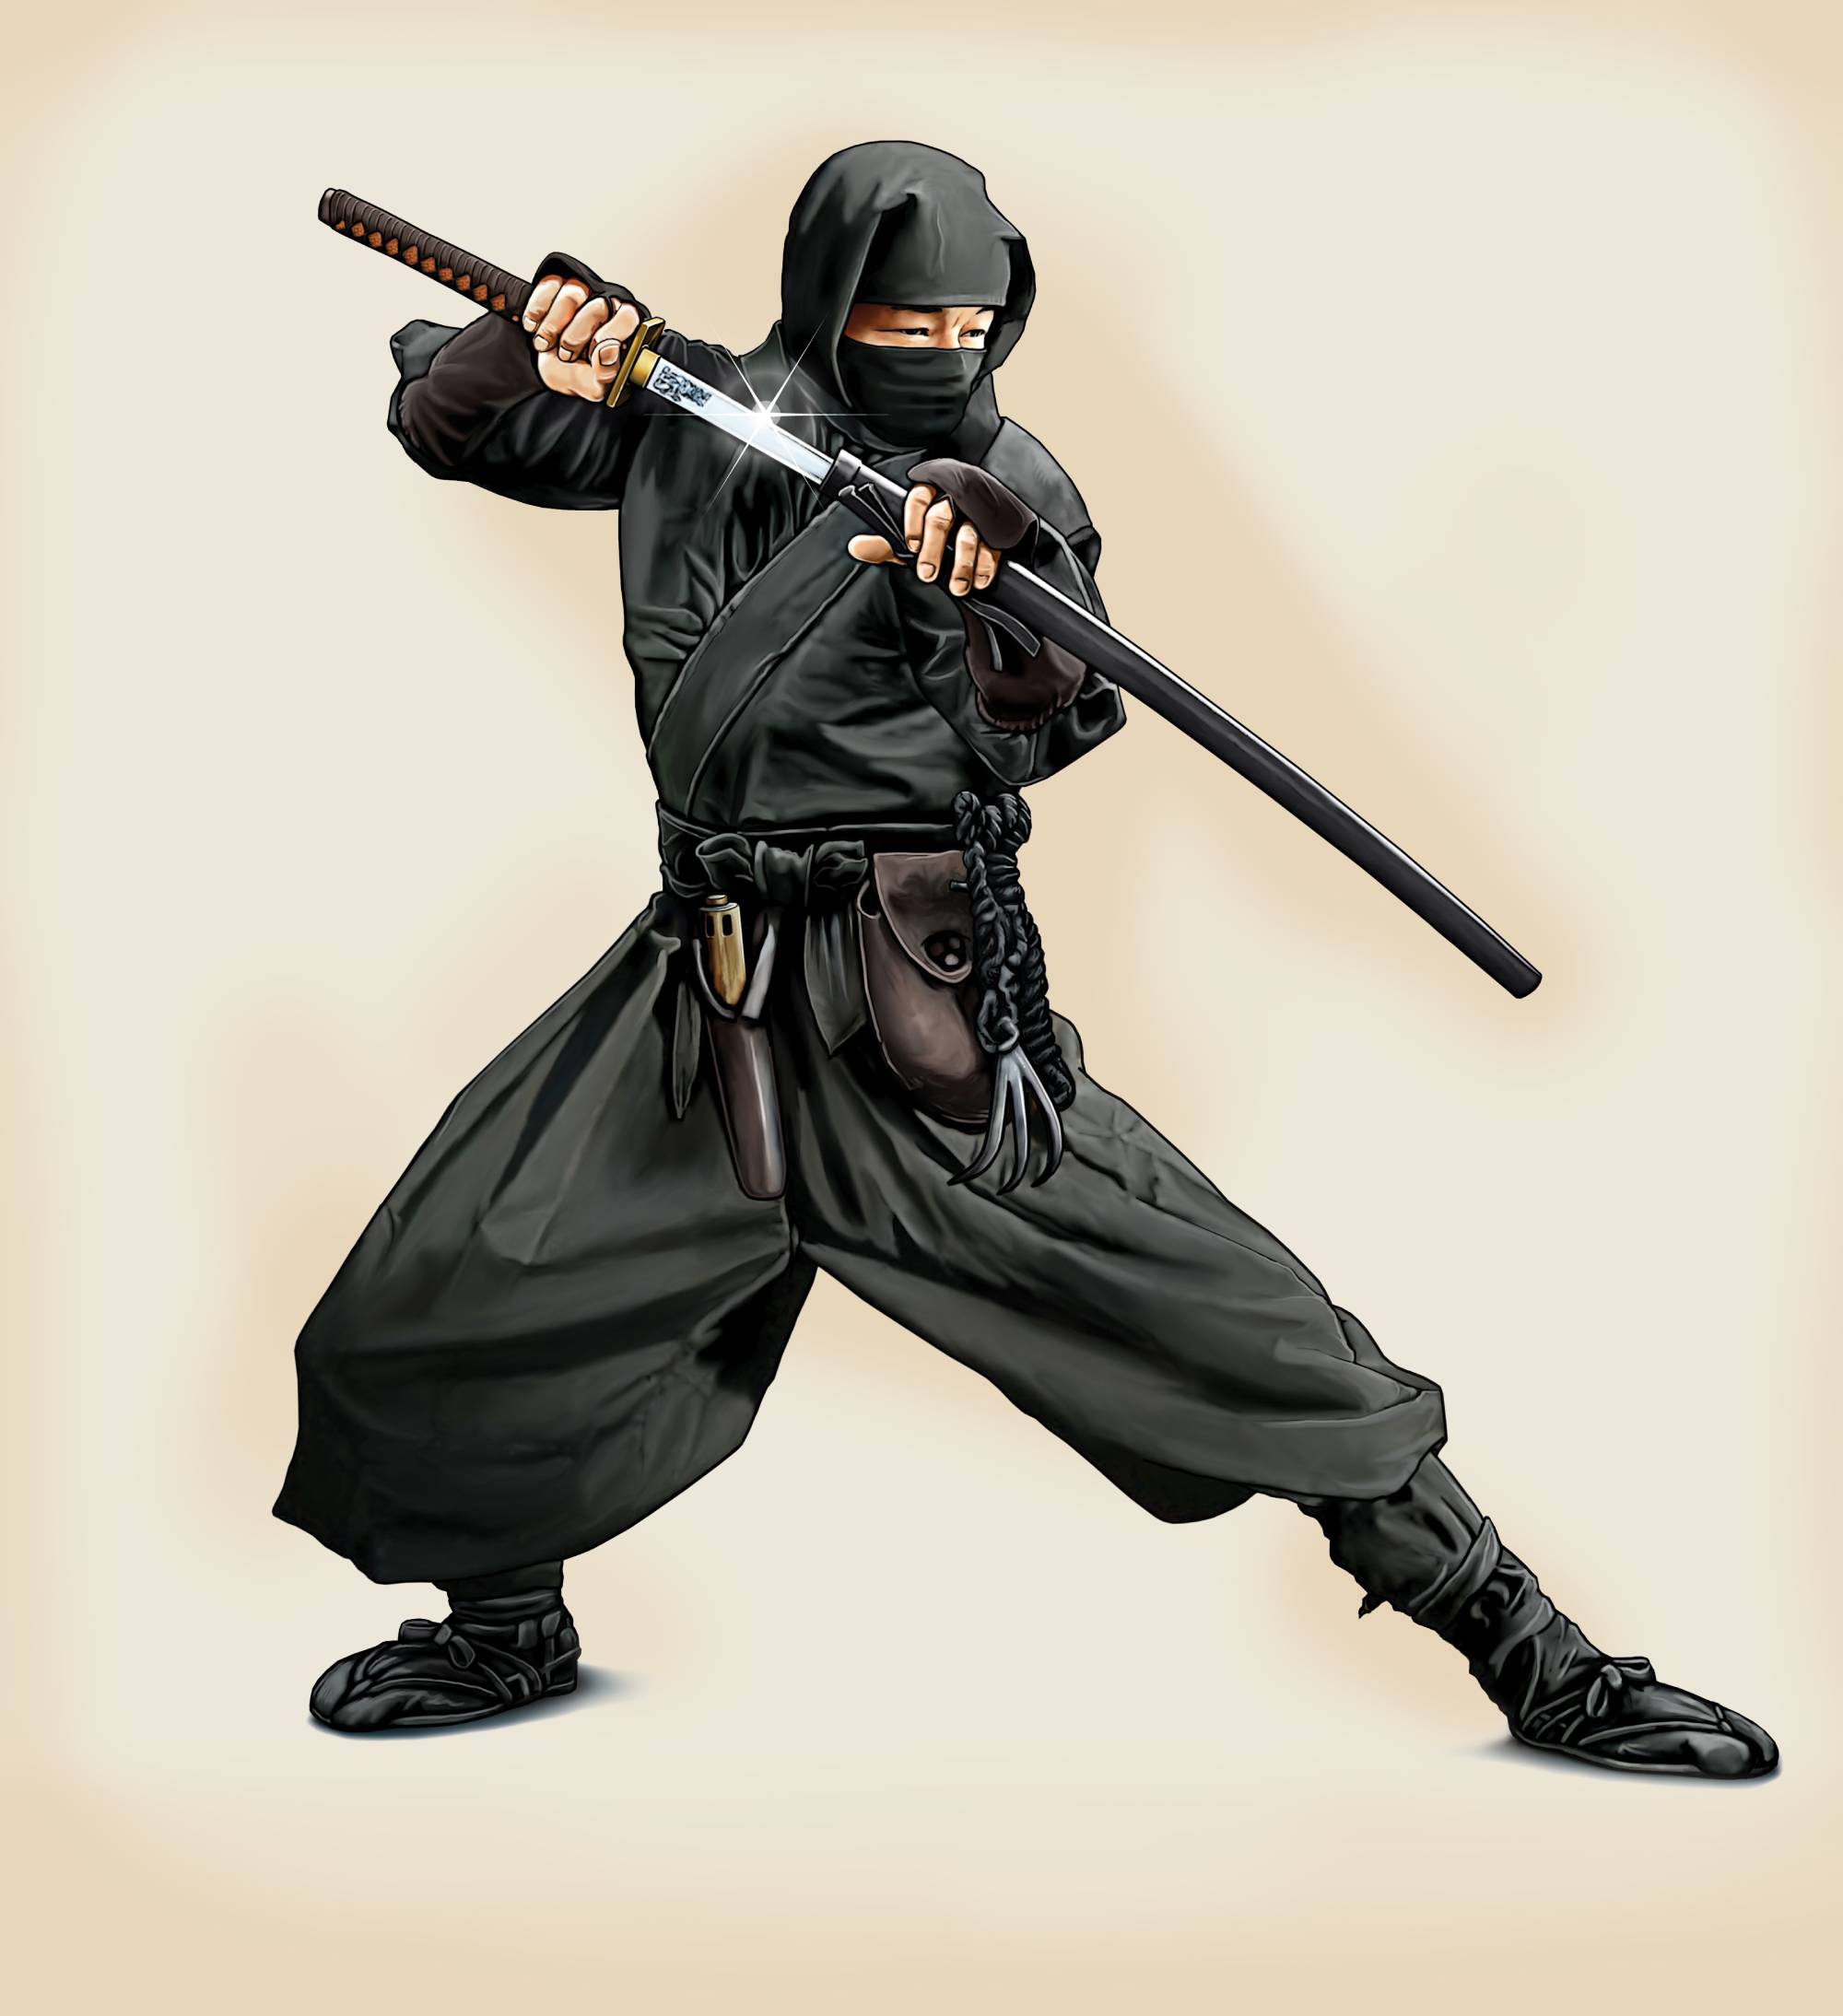 A image of a ninja in a ready to attack stance.